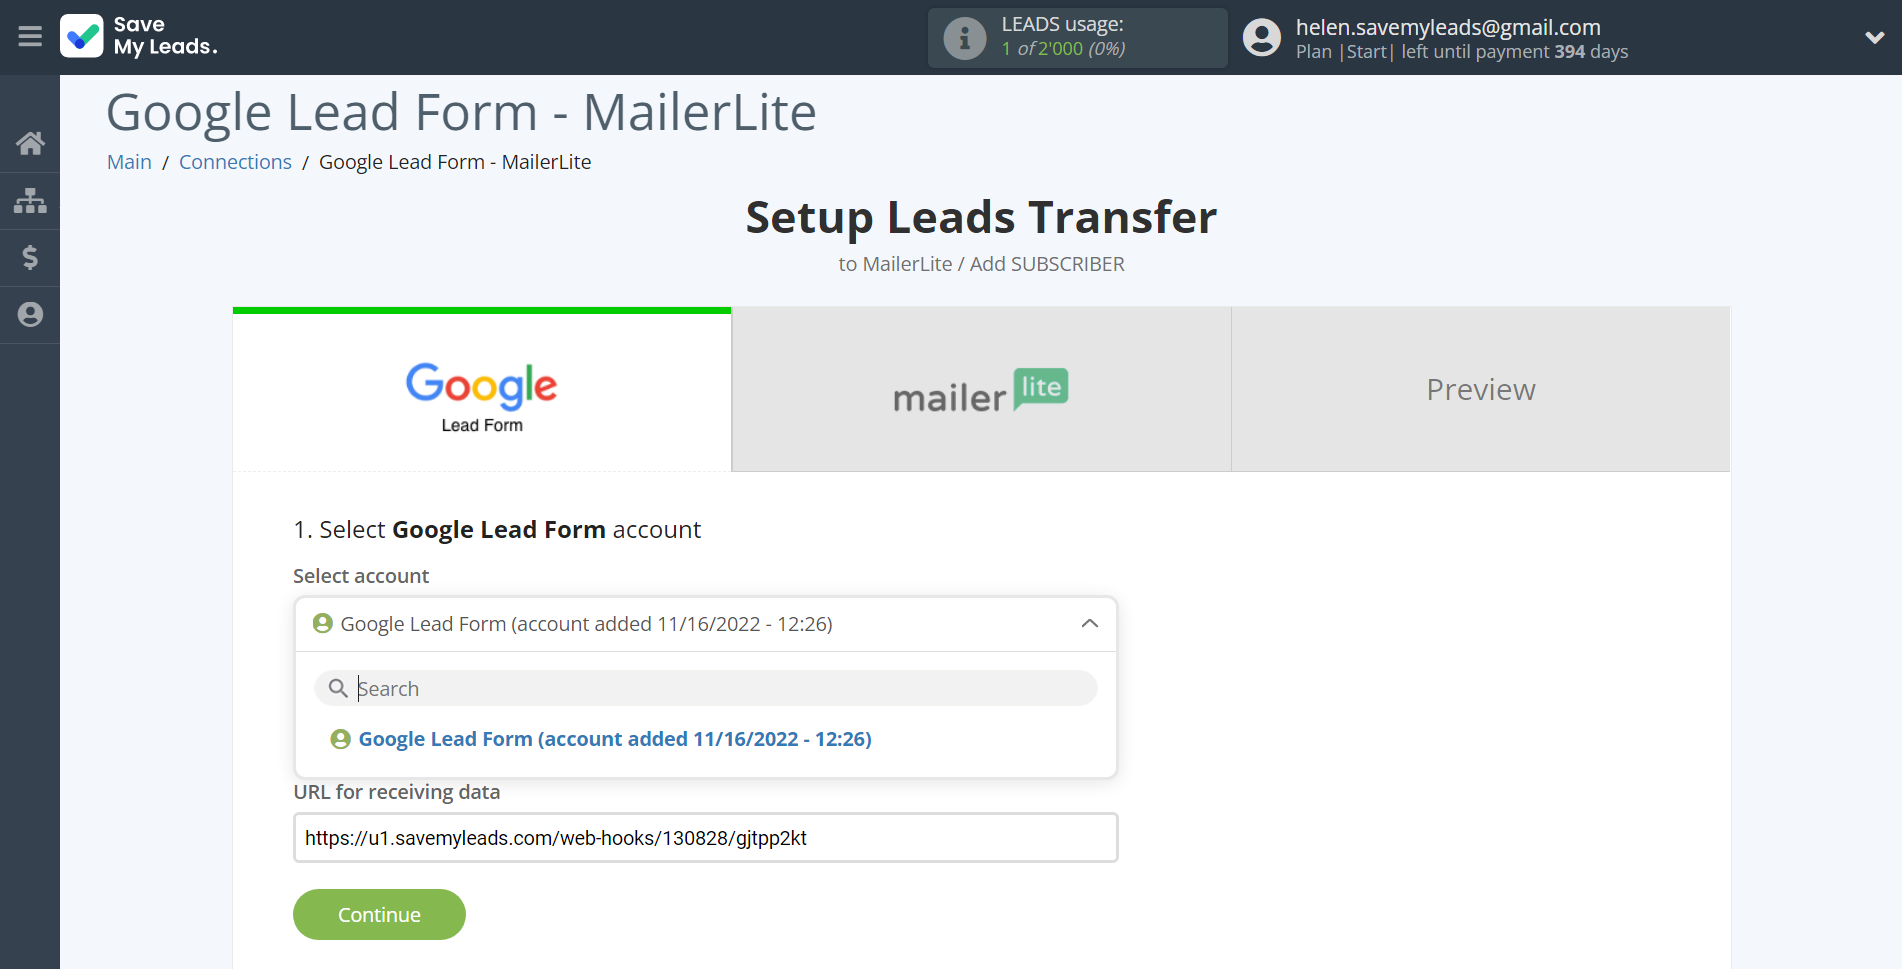 How to Connect Google Lead Form with MailerLite | Data Source account selection